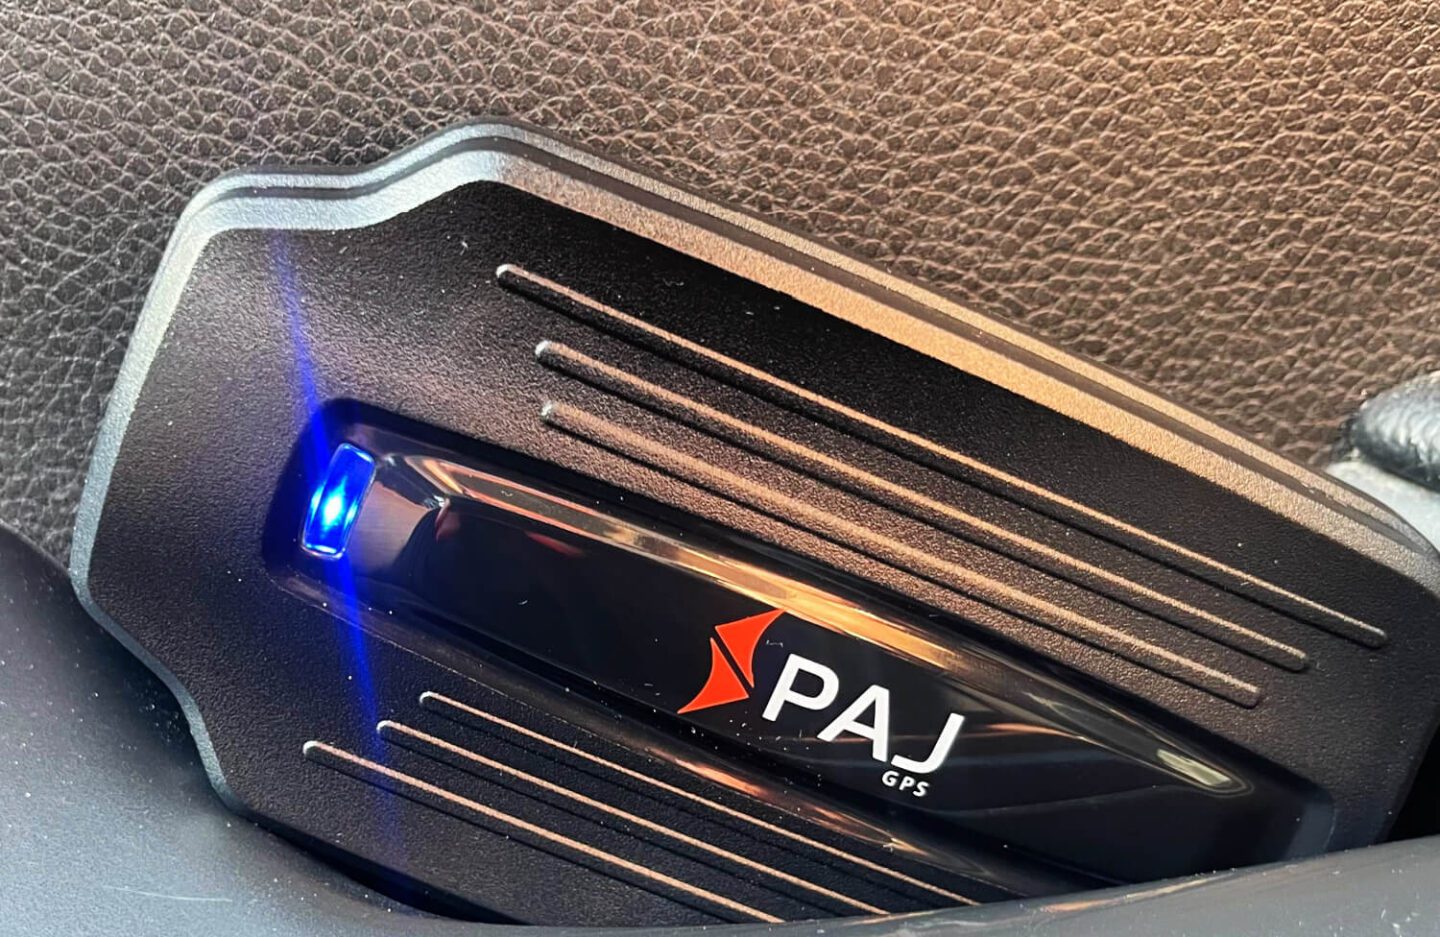 PAJ POWER Finder 4G GPS Tracker Review - Rock and Roll Pussycat